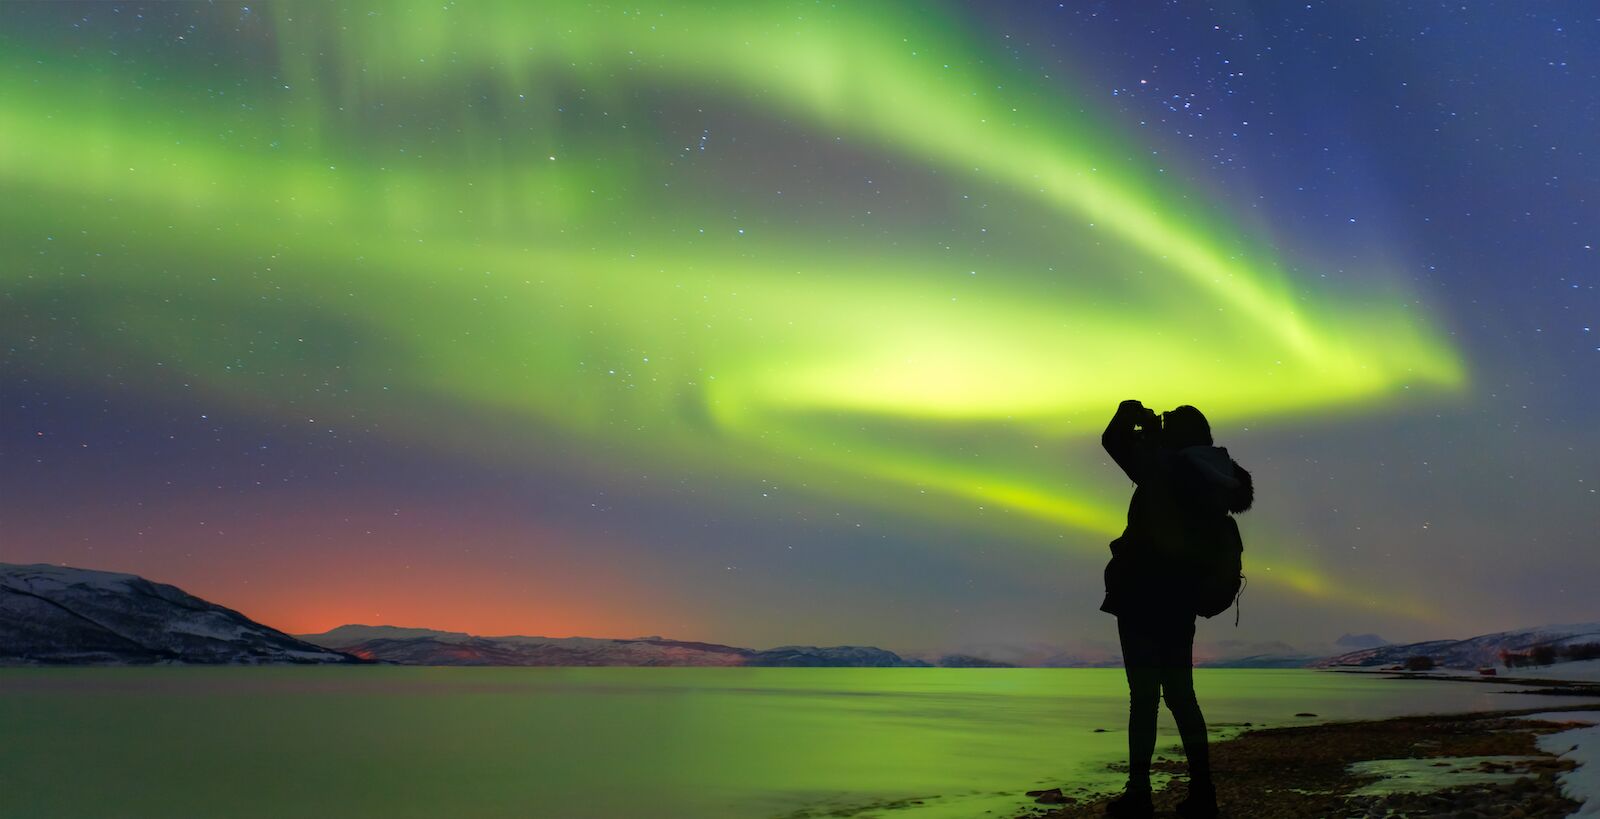 Silhouette of female photographer take a photograph at aurora borealis - Northern lights in the sky